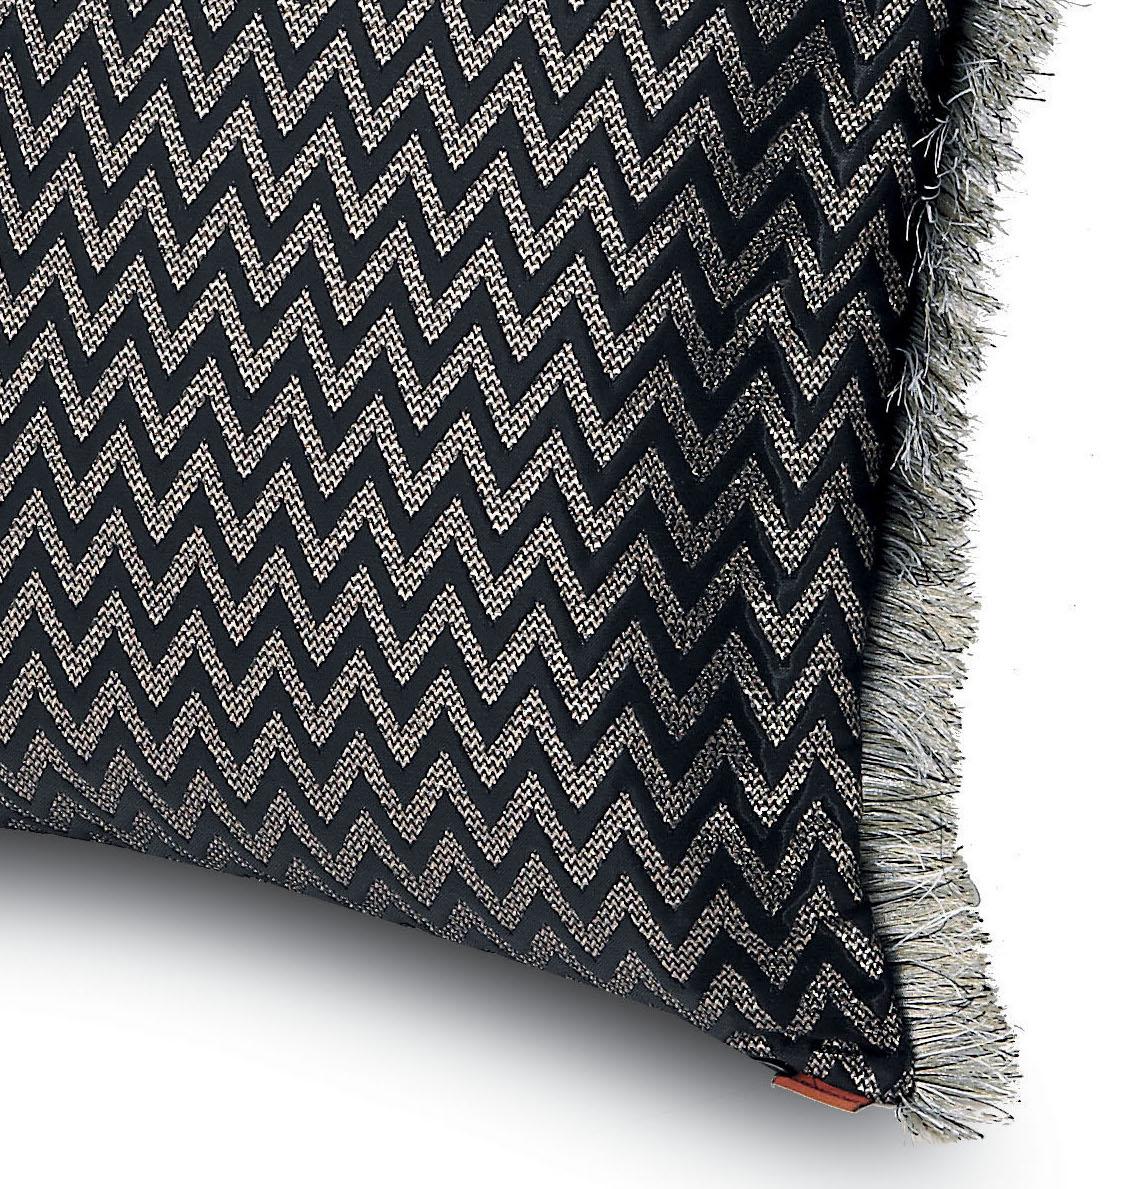 Embossed chevron jaquard. Perfect for adding an elegant touch to any bedroom or living room.

Composition: 60% Polyester, 40% PA. Care: delicate dry-clean with perchlorethylene.

